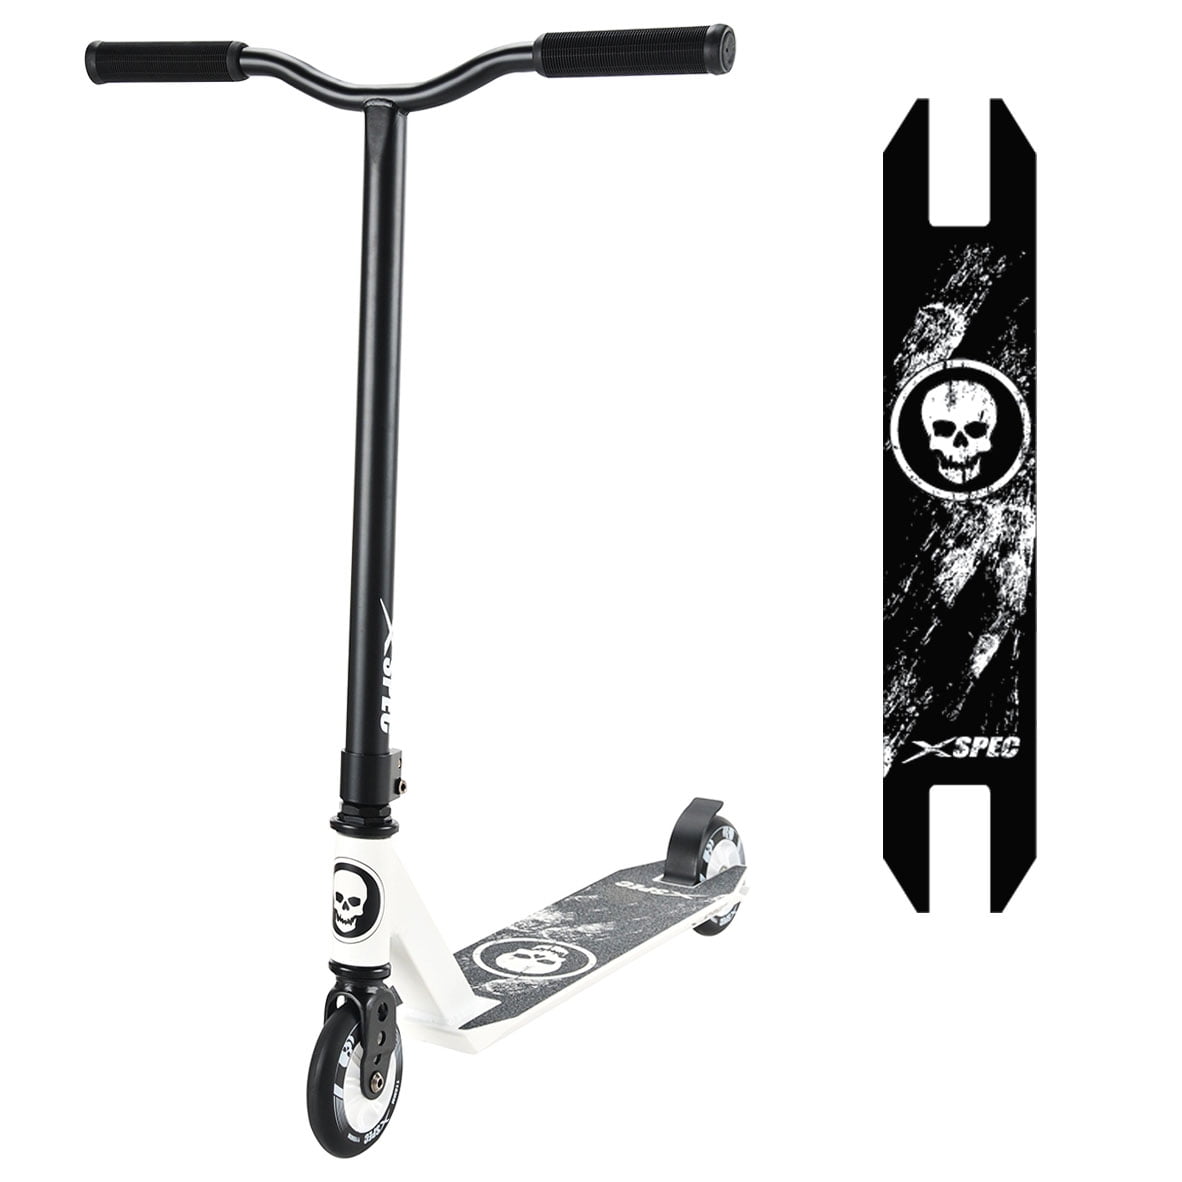 Madd Jungen Carve Pro-X Stuntscooter One Size Mehrfarbig 